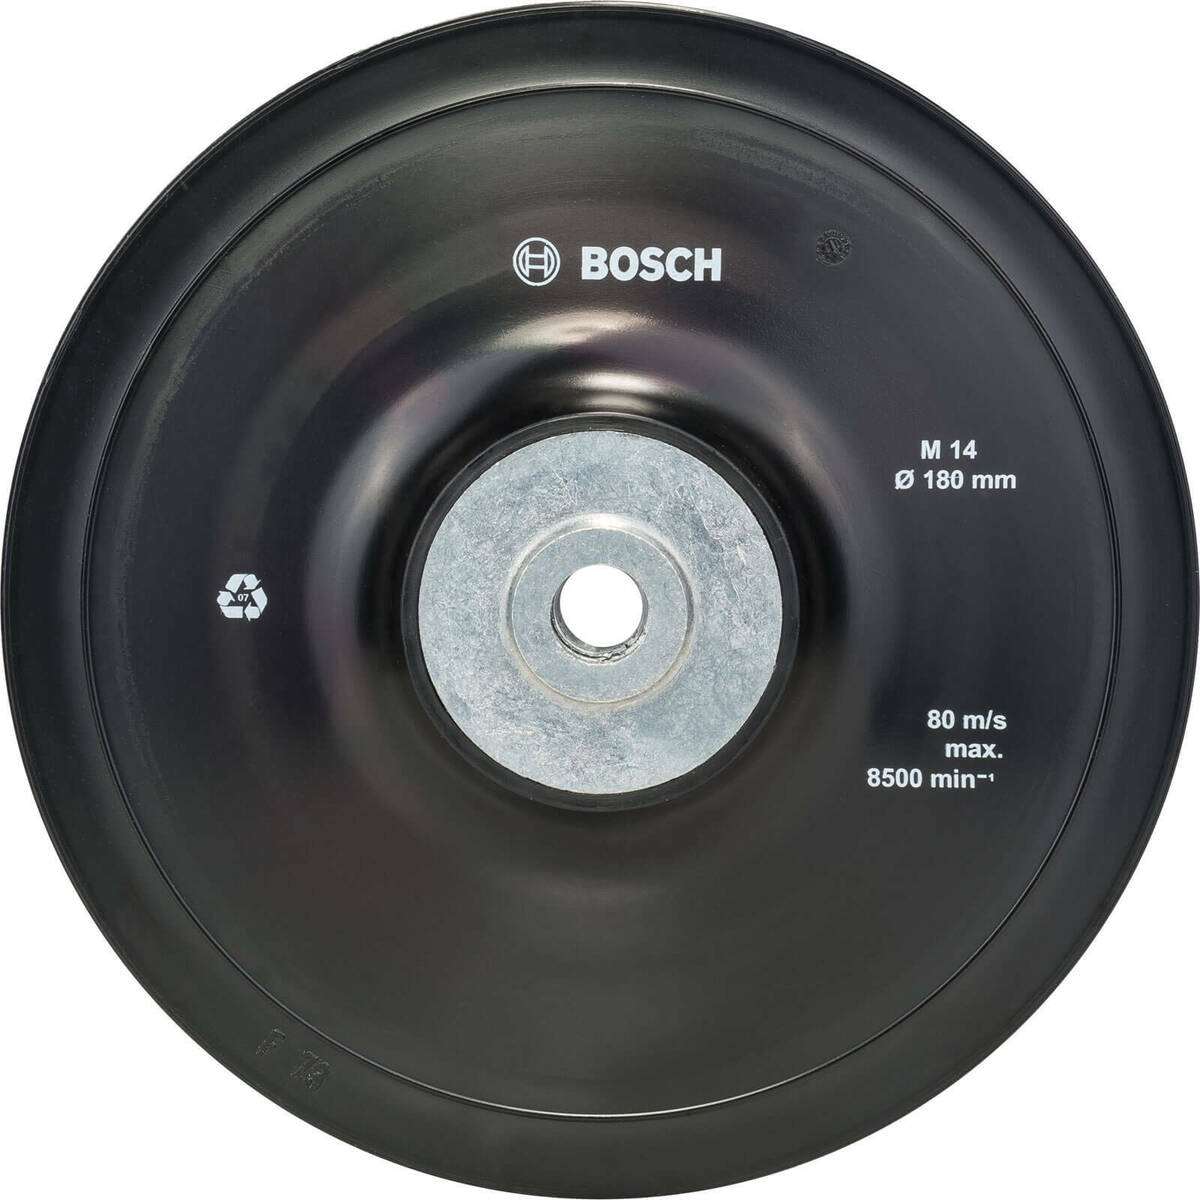 Bosch Backing pad 180 mm, 8 500 rpm 2608601209 Power Tool Services